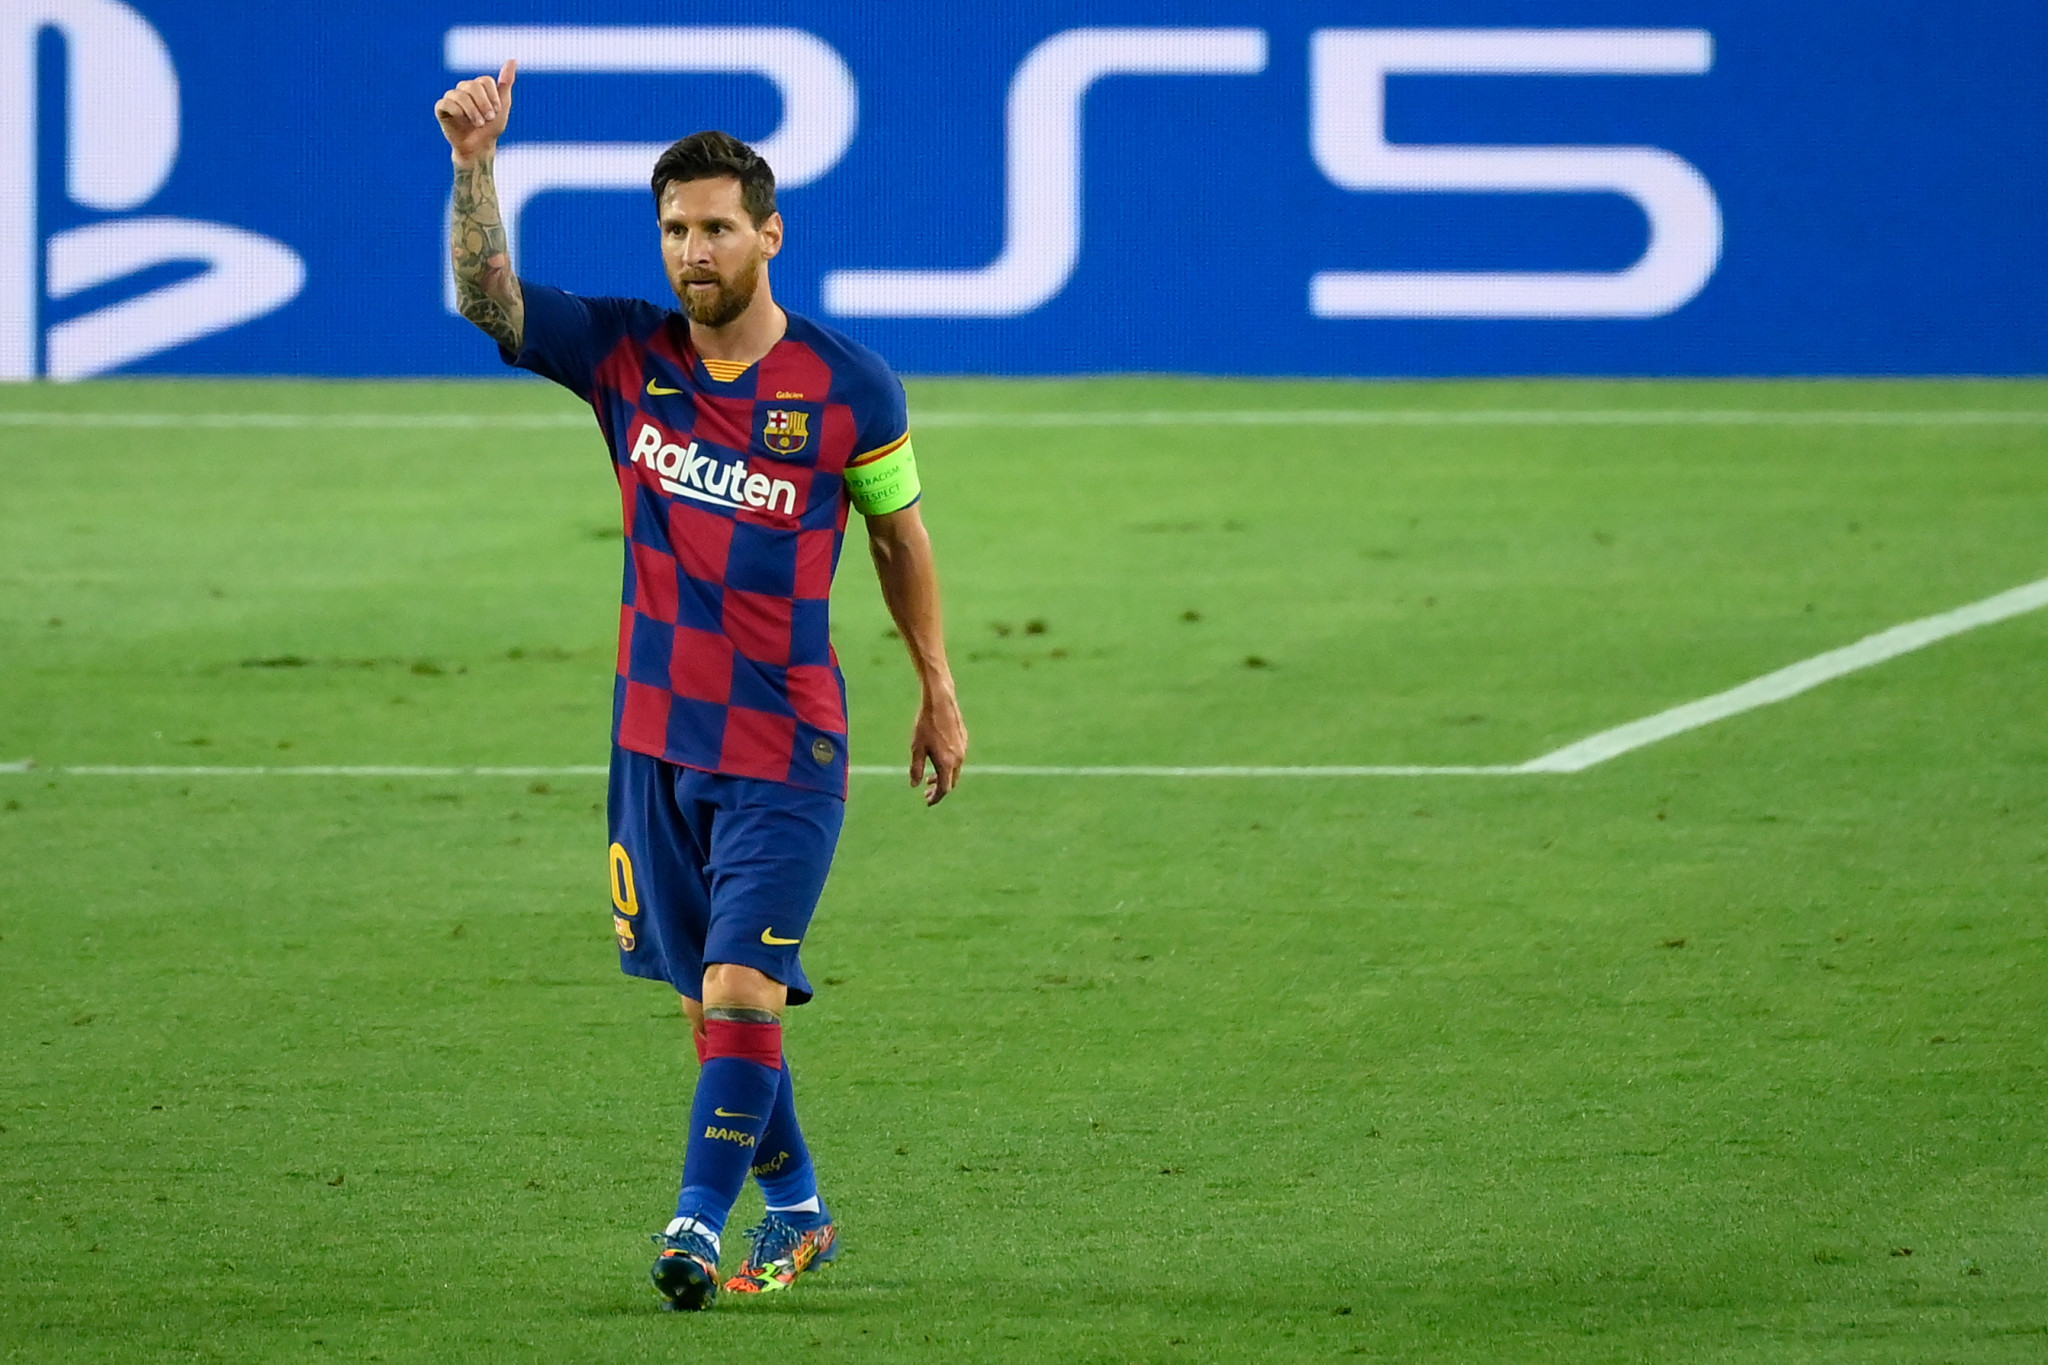 Lionel Messi remains Barcelona's shining star but concerns have been raised over the team's future ©Getty Images